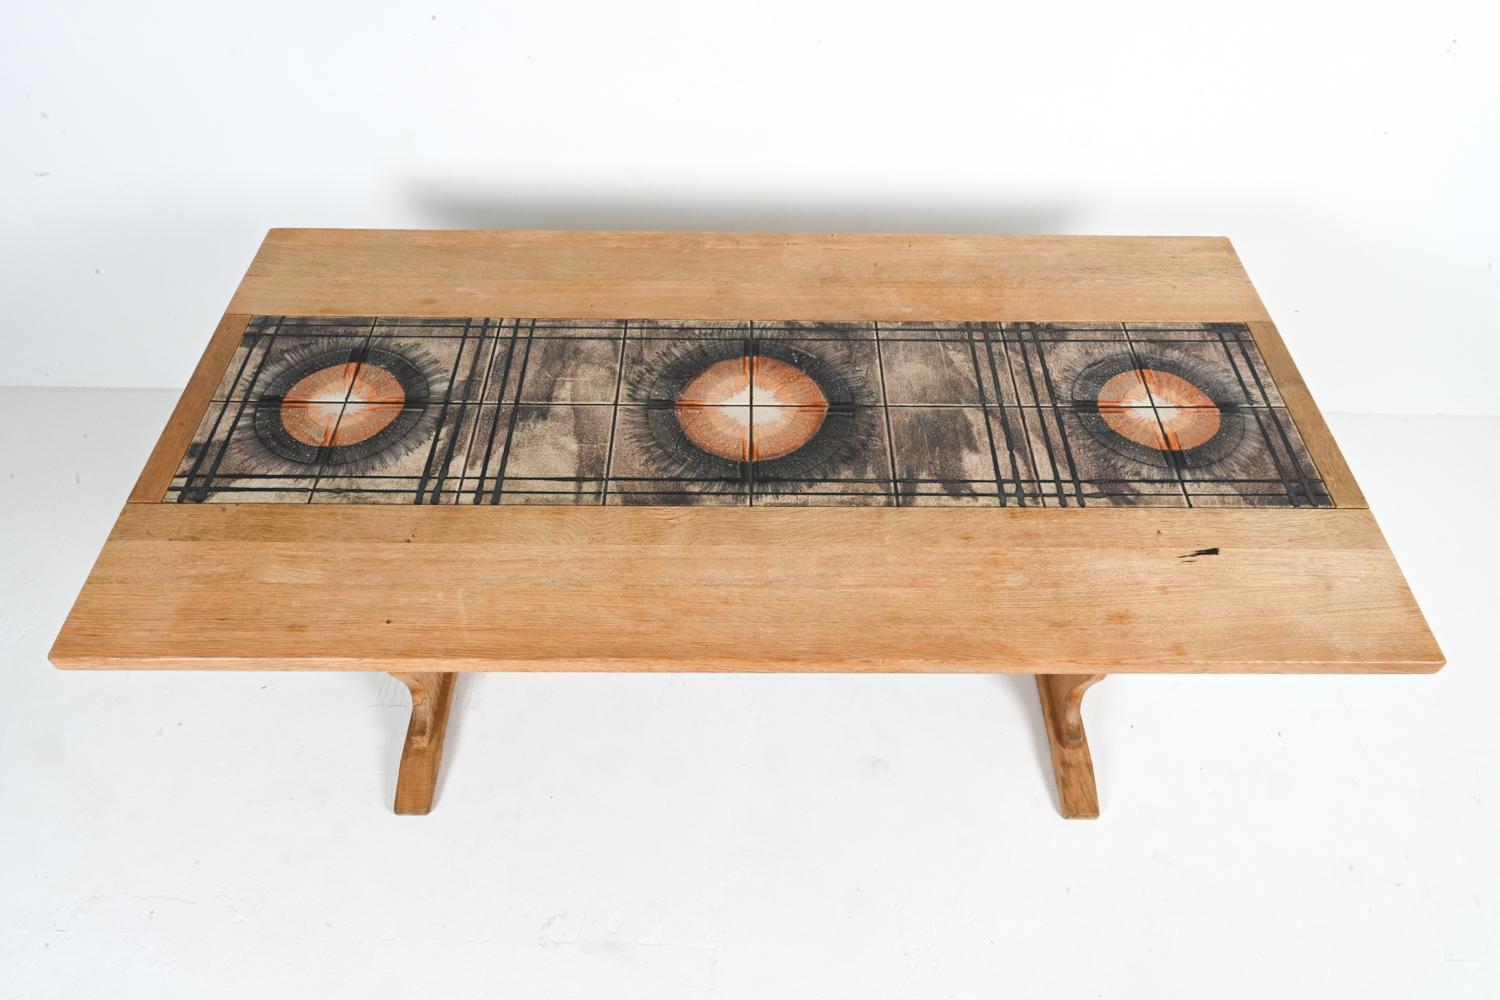 Danish Ox Art Oak & Ceramic Tile Mosaic-Top Dining Table With Leaves, c. 1970's For Sale 1